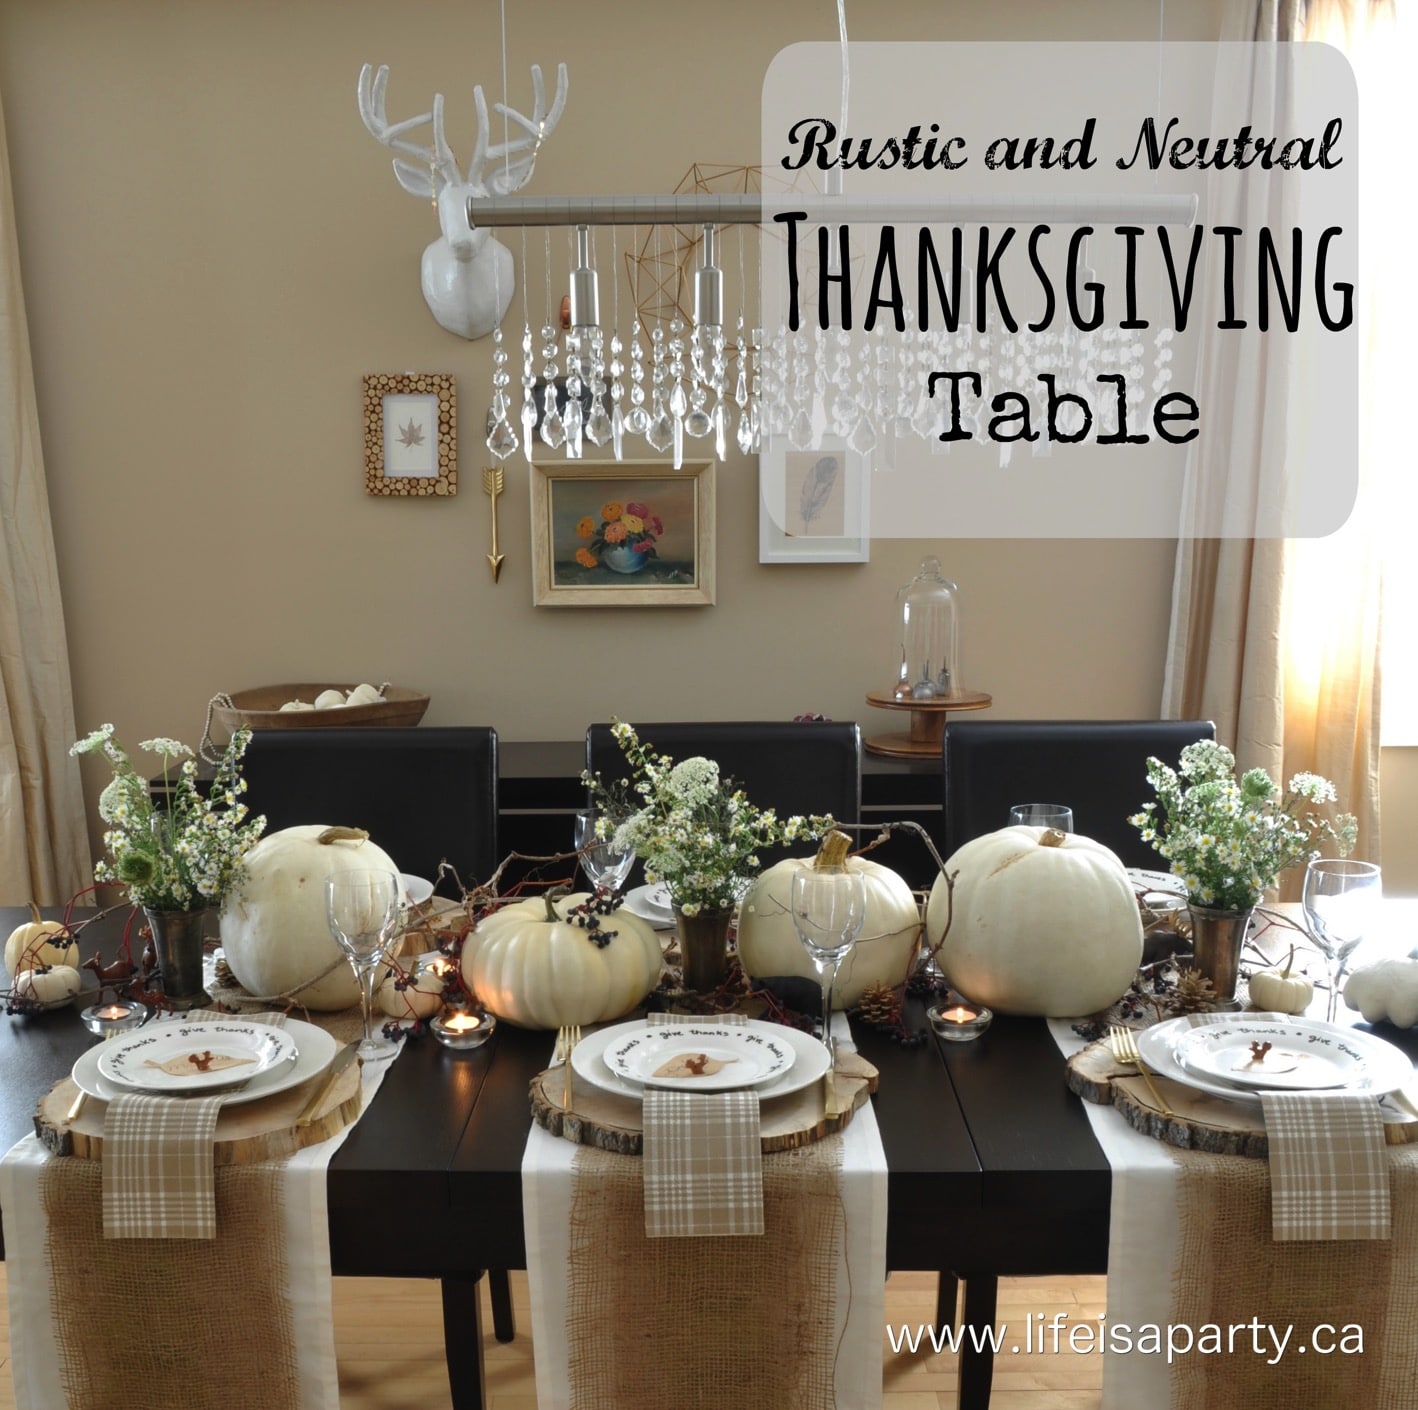 Rustic Thanksgiving Table Setting: Beautiful Thanksgiving table decorated with wildflowers, little mini animals, tree stumps and white pumpkins. 